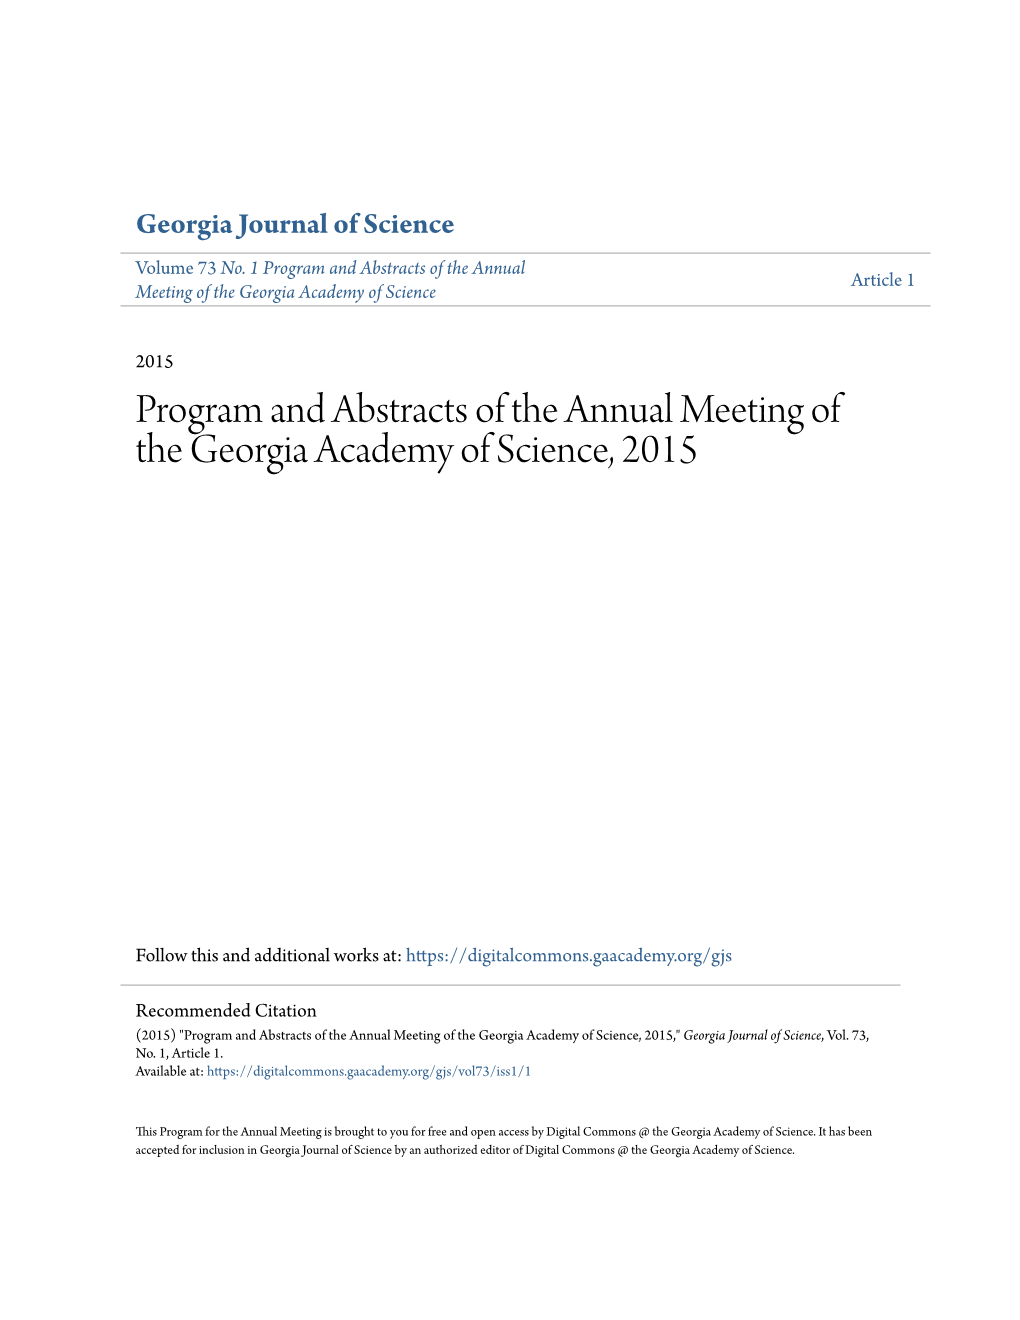 Program and Abstracts of the Annual Meeting of the Georgia Academy of Science, 2015